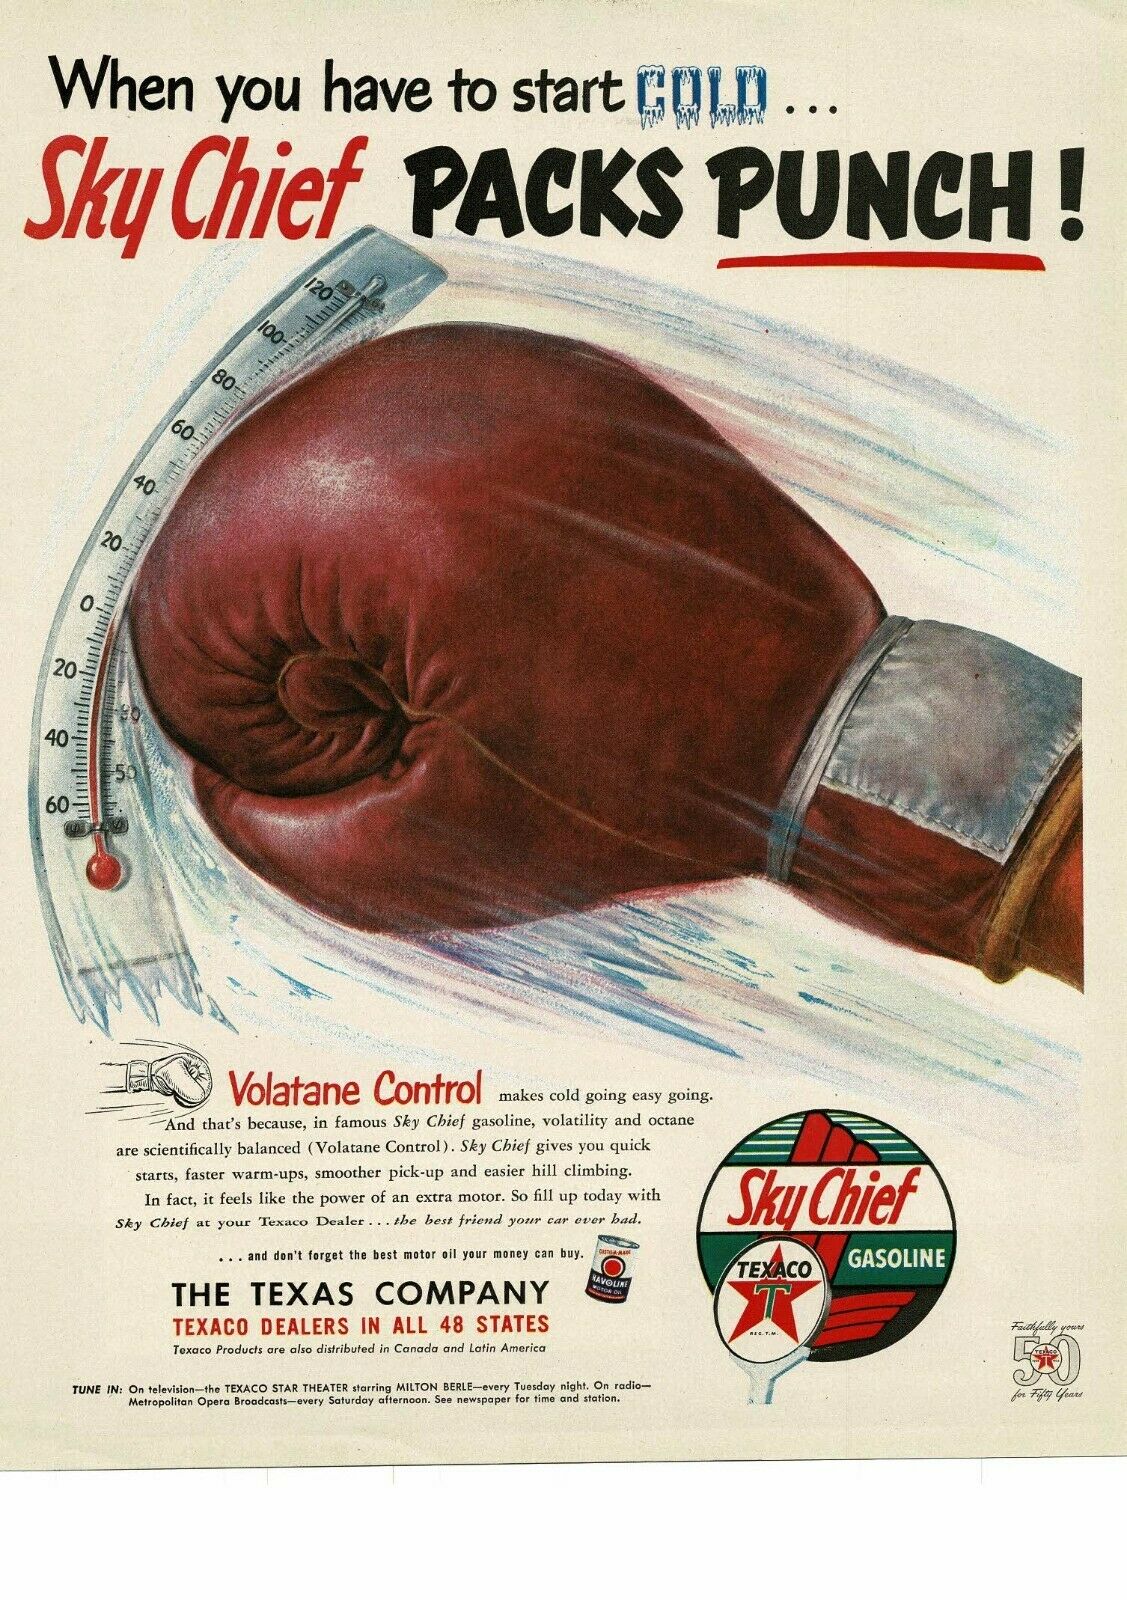 1952 Texaco Sky Chief Gasoline Red Boxing Glove Punches Thermometer Vintage Ad